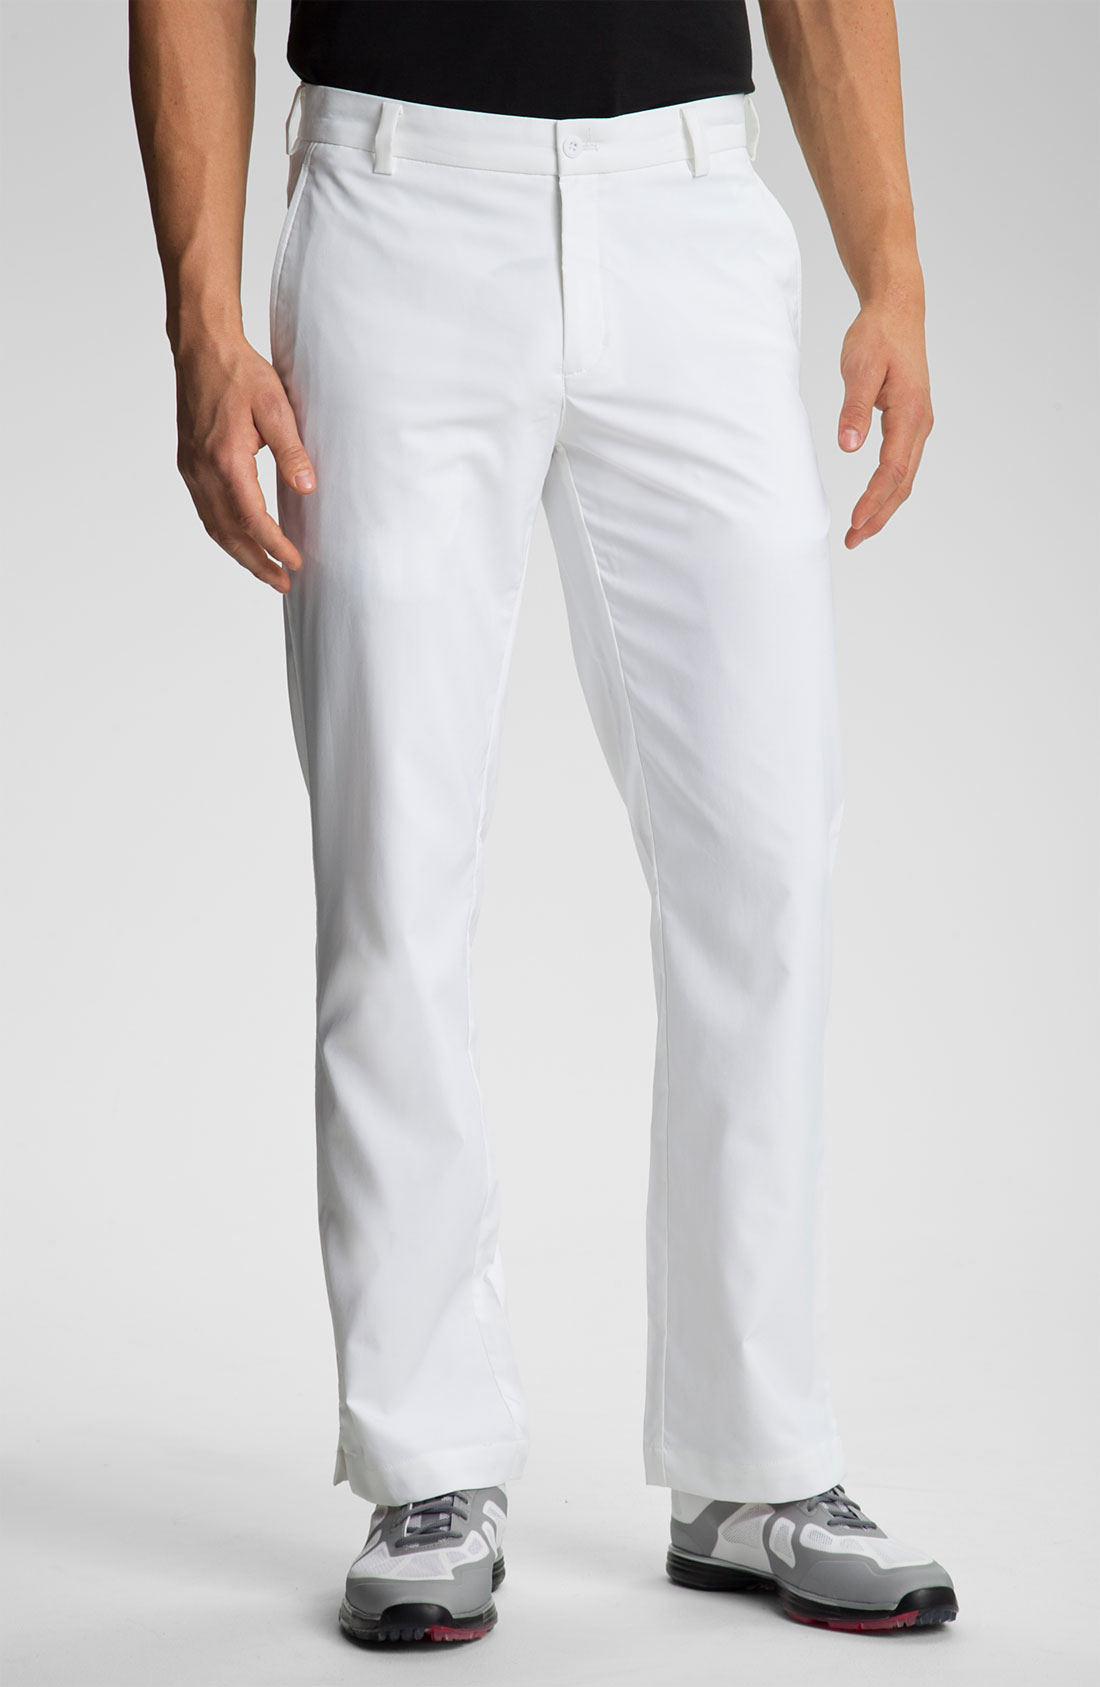 Nike X Undercover Gyakusou Mod Tech Flat Front Golf Pants in White for ...